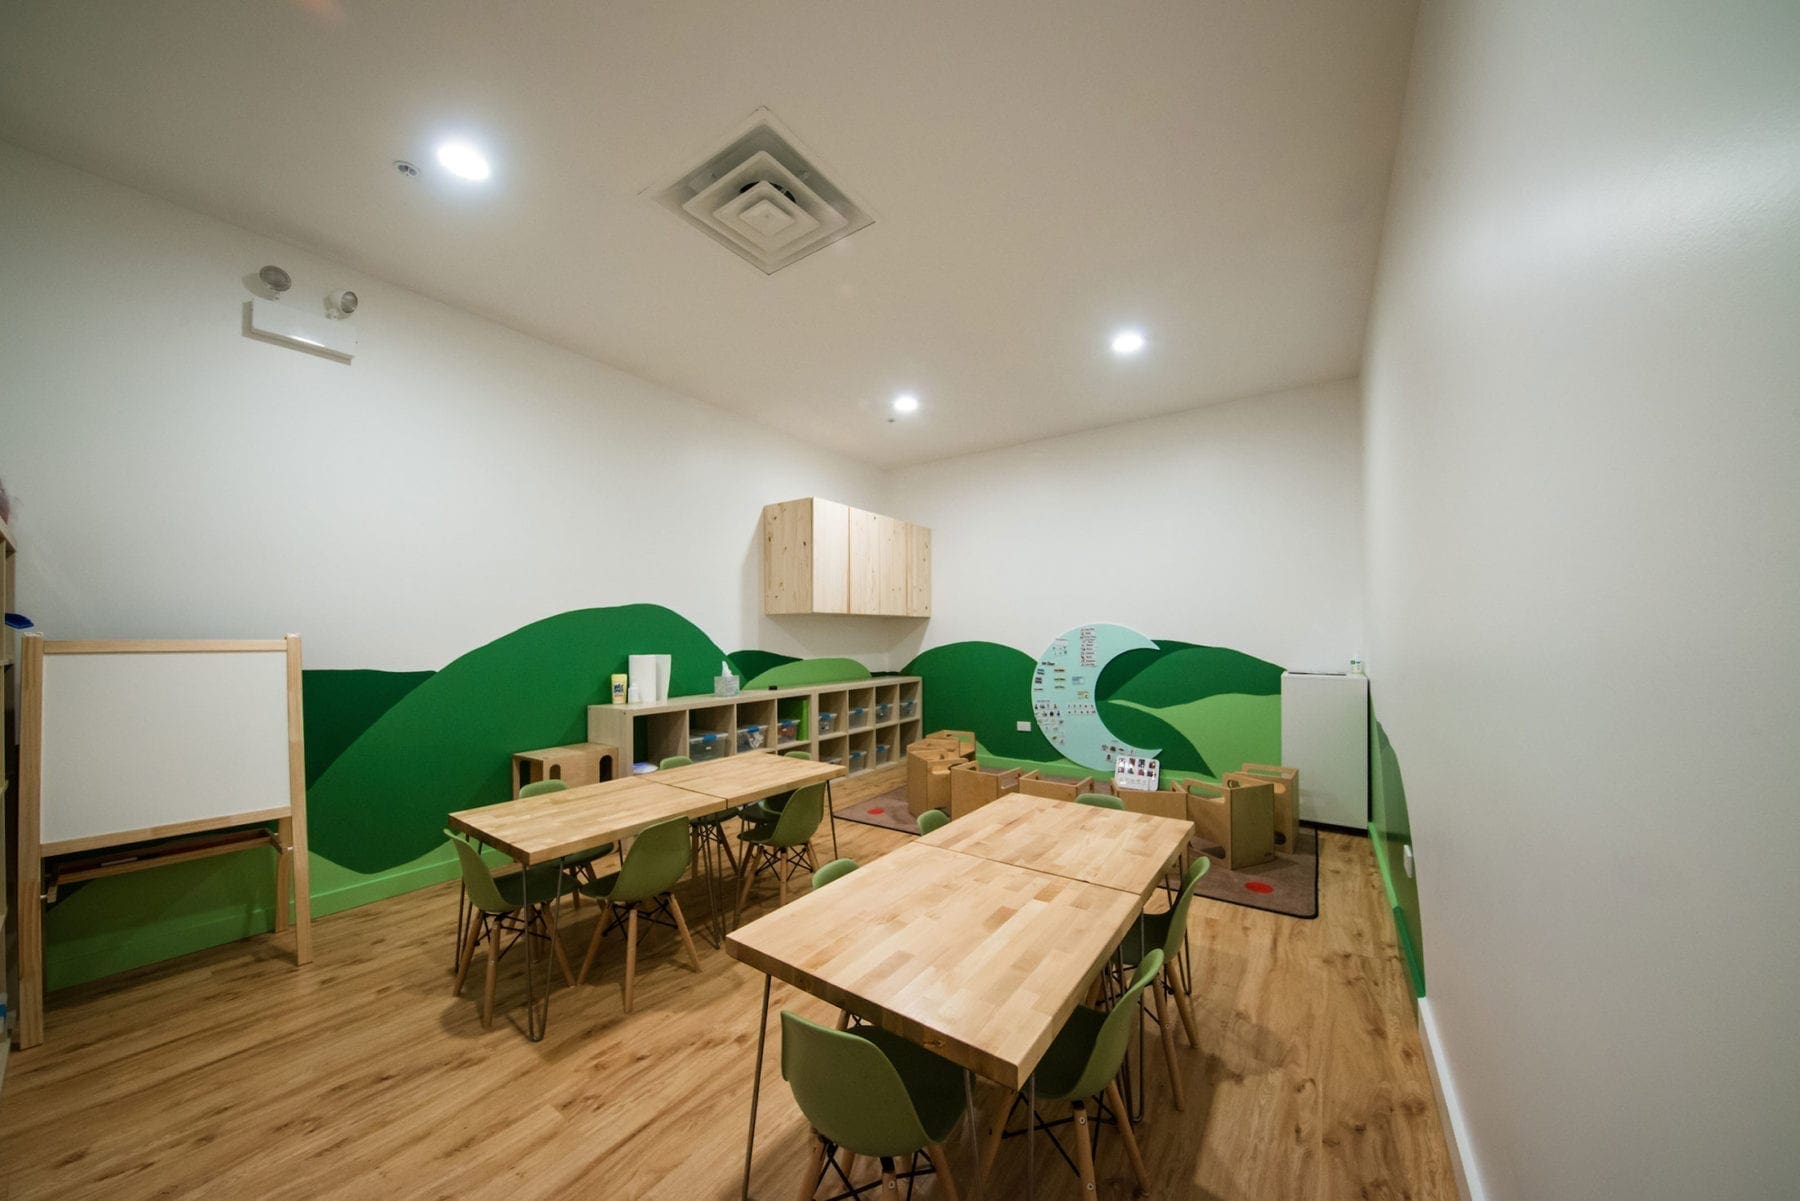 Classroom - Chicago Kids Therapy Virtual Tour